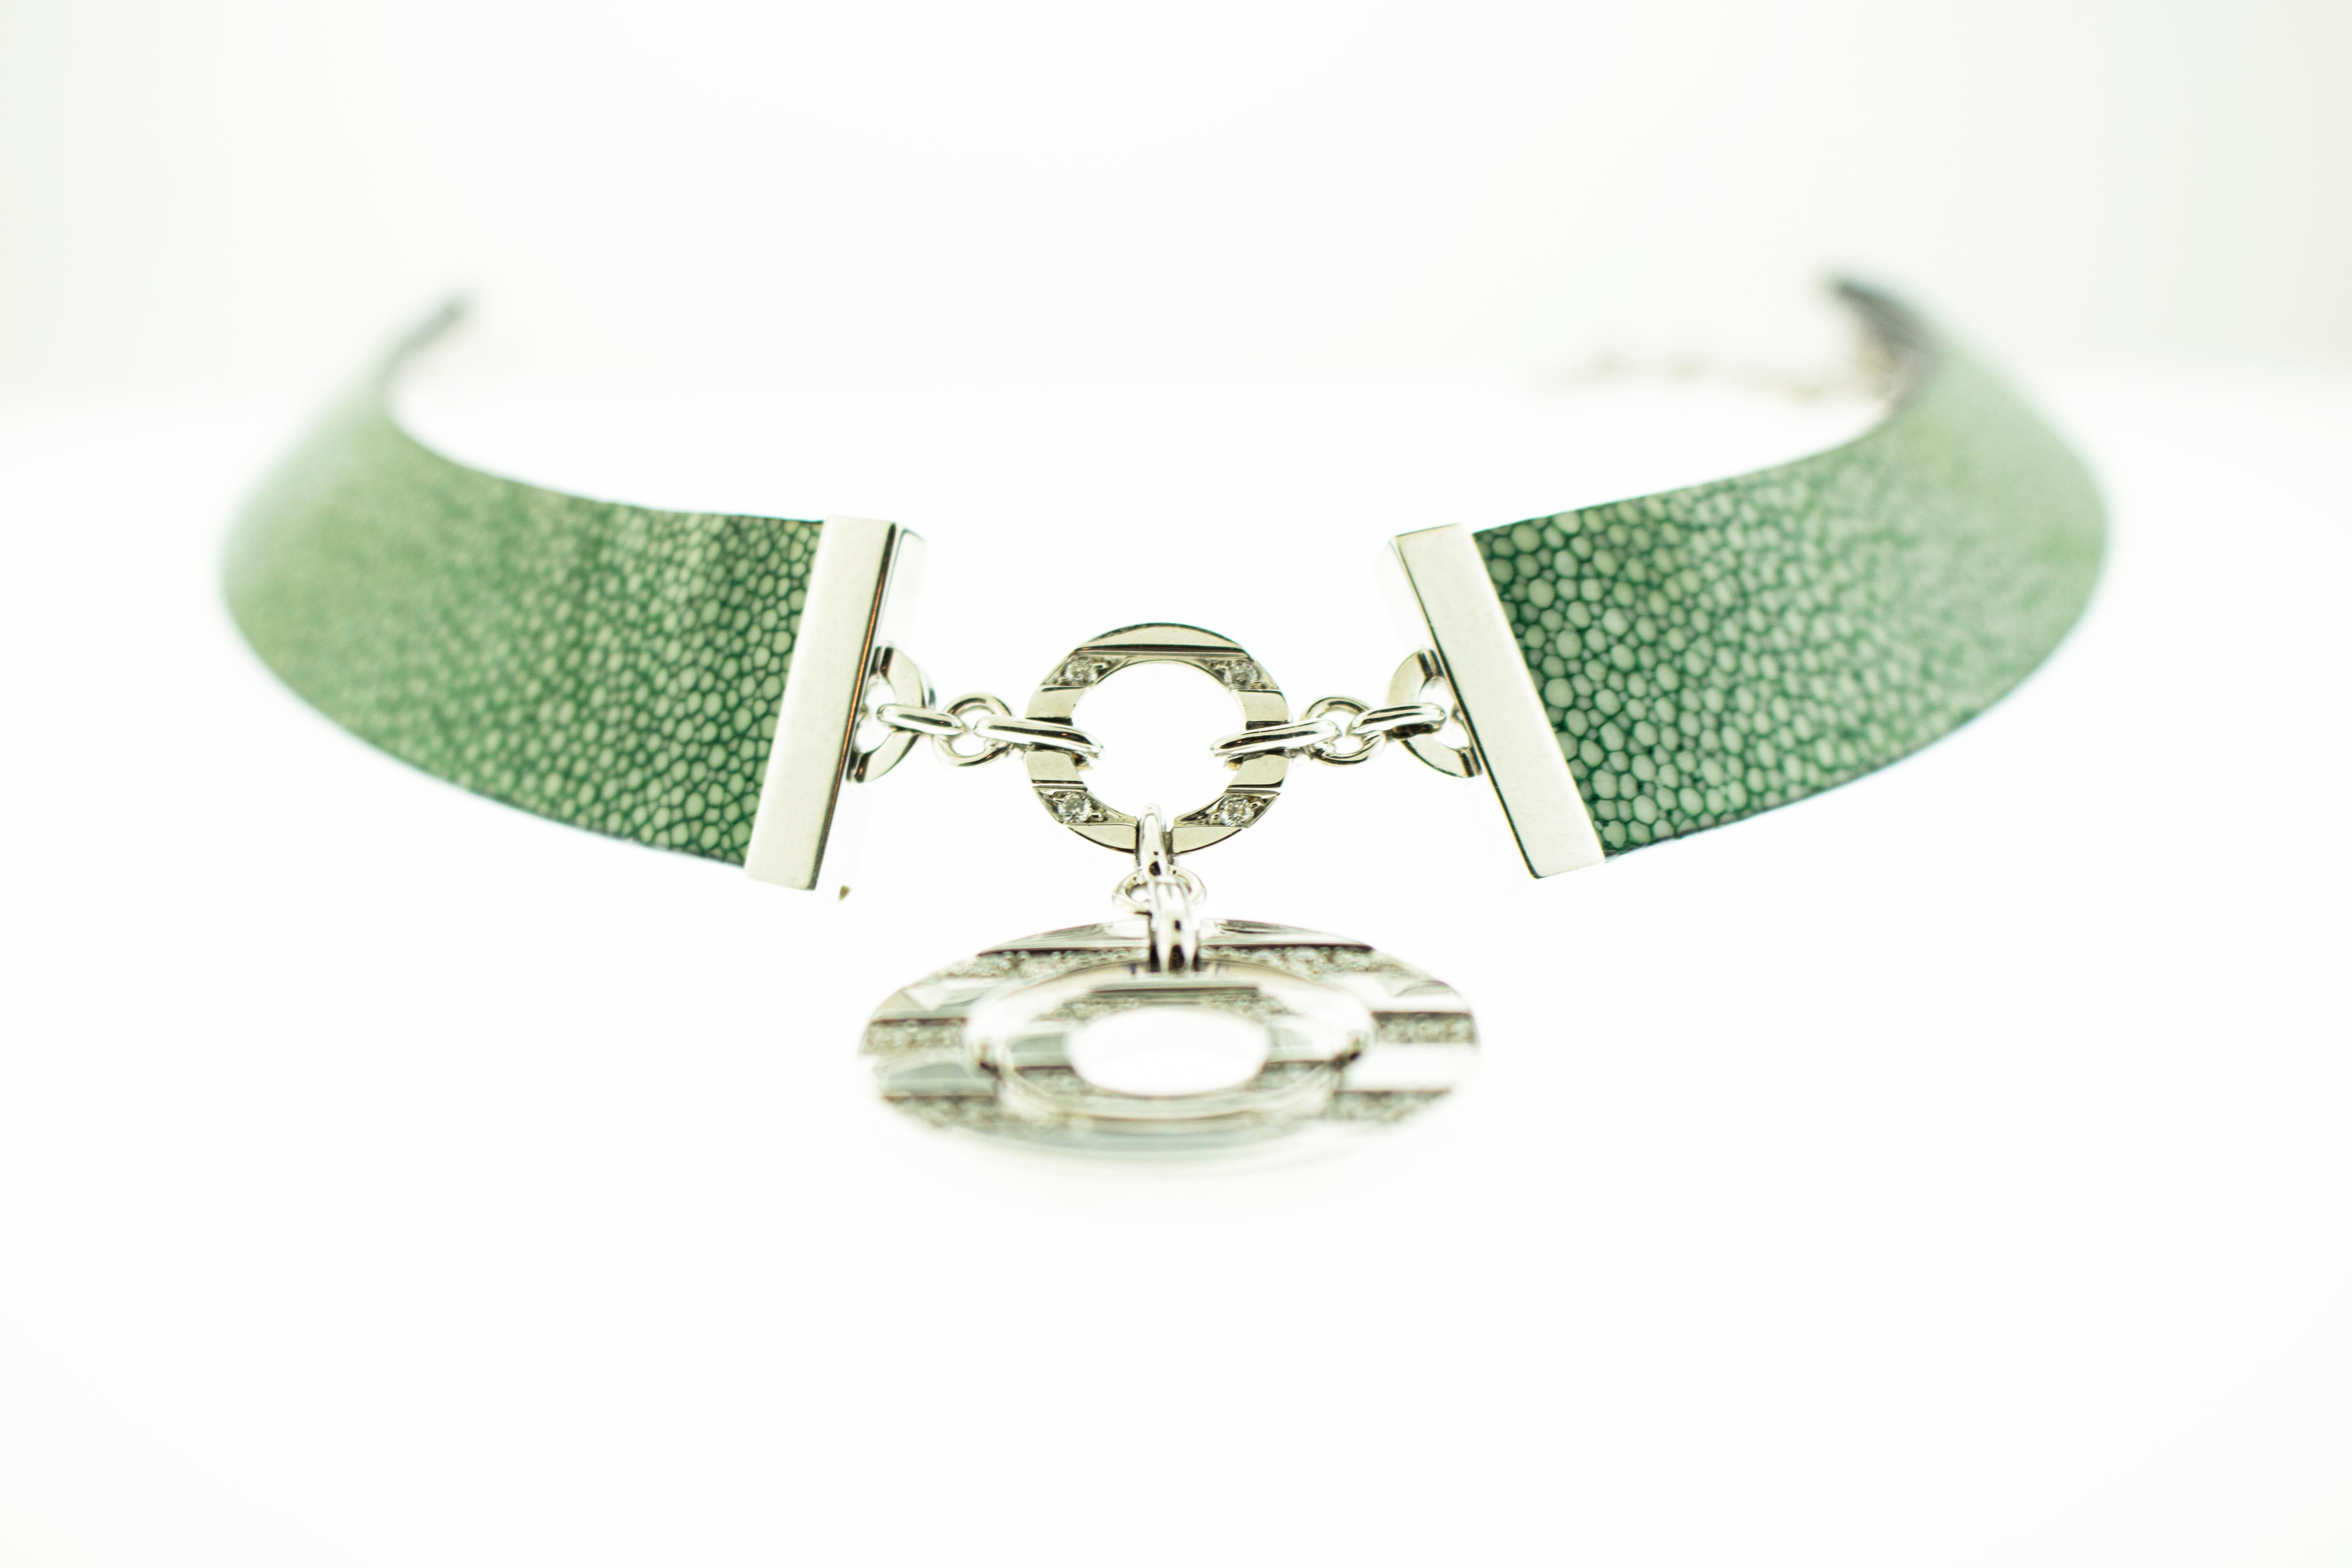 Bulgari 18k white gold, green stingray leather and diamond necklace and bracelet set. 15 and 8 inches